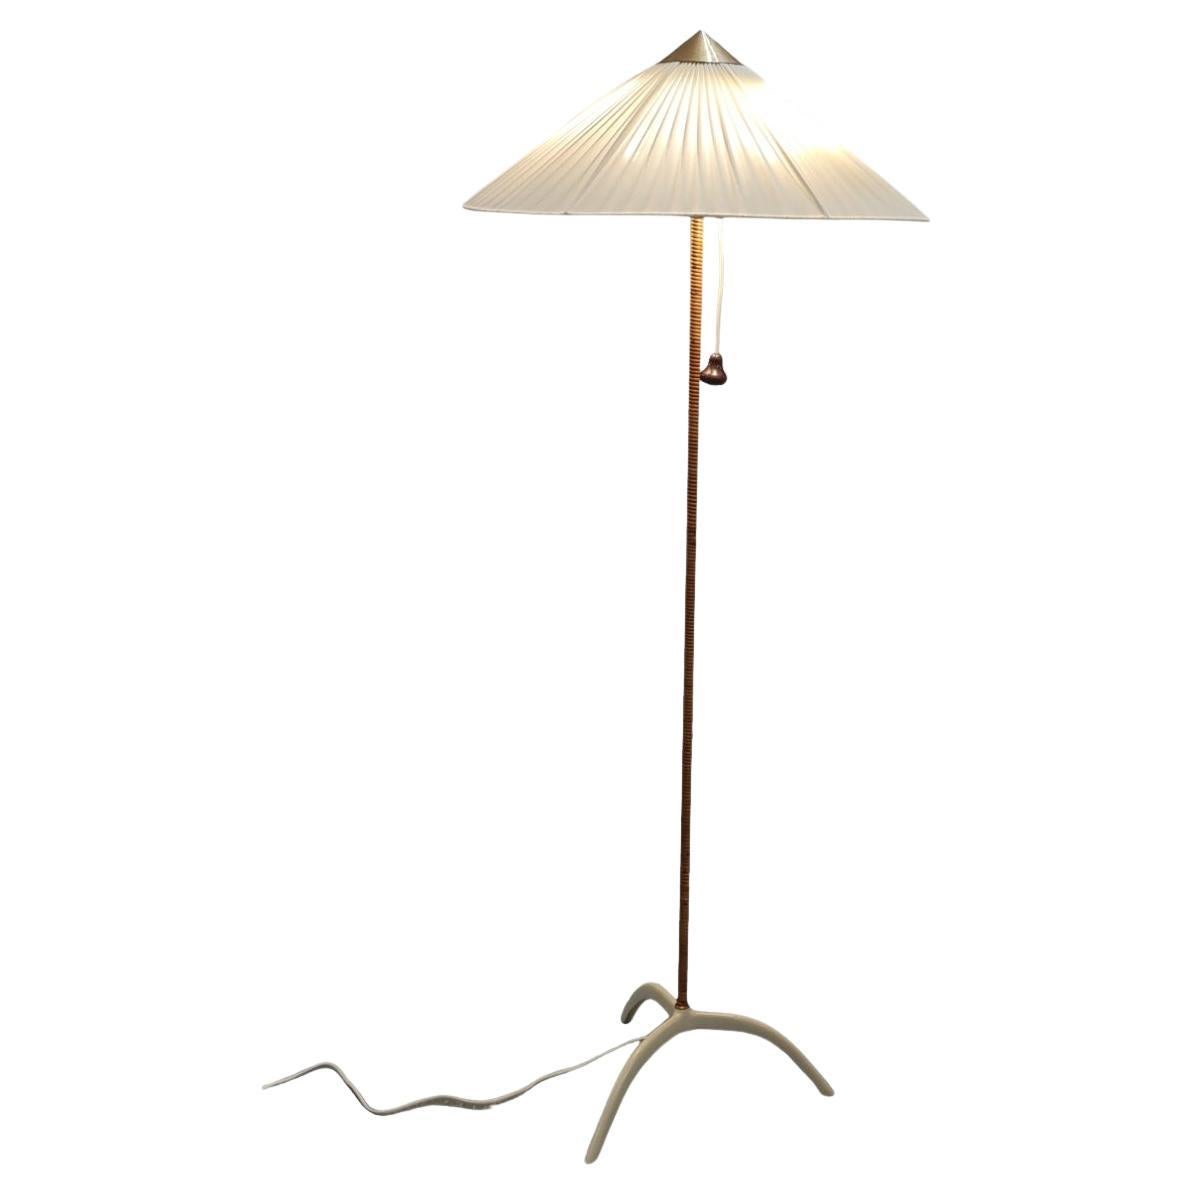 Paavo Tynell (1890-1973) original floor lamp model. 9615, manufactured by Taito Oy in the 1950s.  A beautiful floor lamp with a lacquered metal and rattan stem. All original parts excluding the beautiful fabric shade. The bottom part (often called